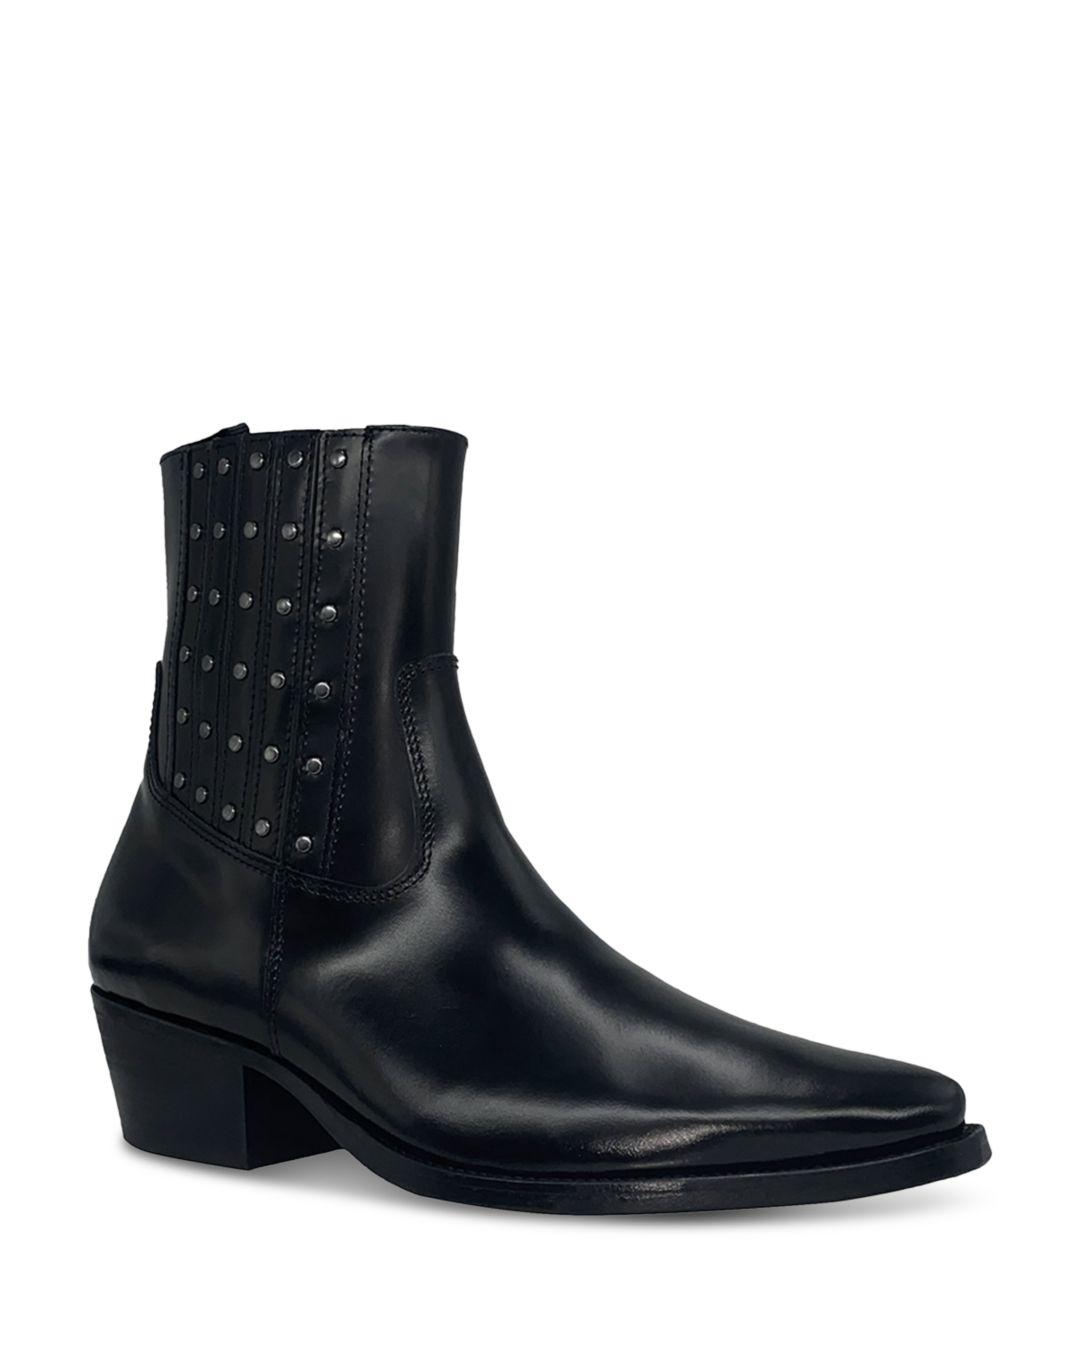 Karl Lagerfeld Studded Leather Western Boots in Black for Men | Lyst